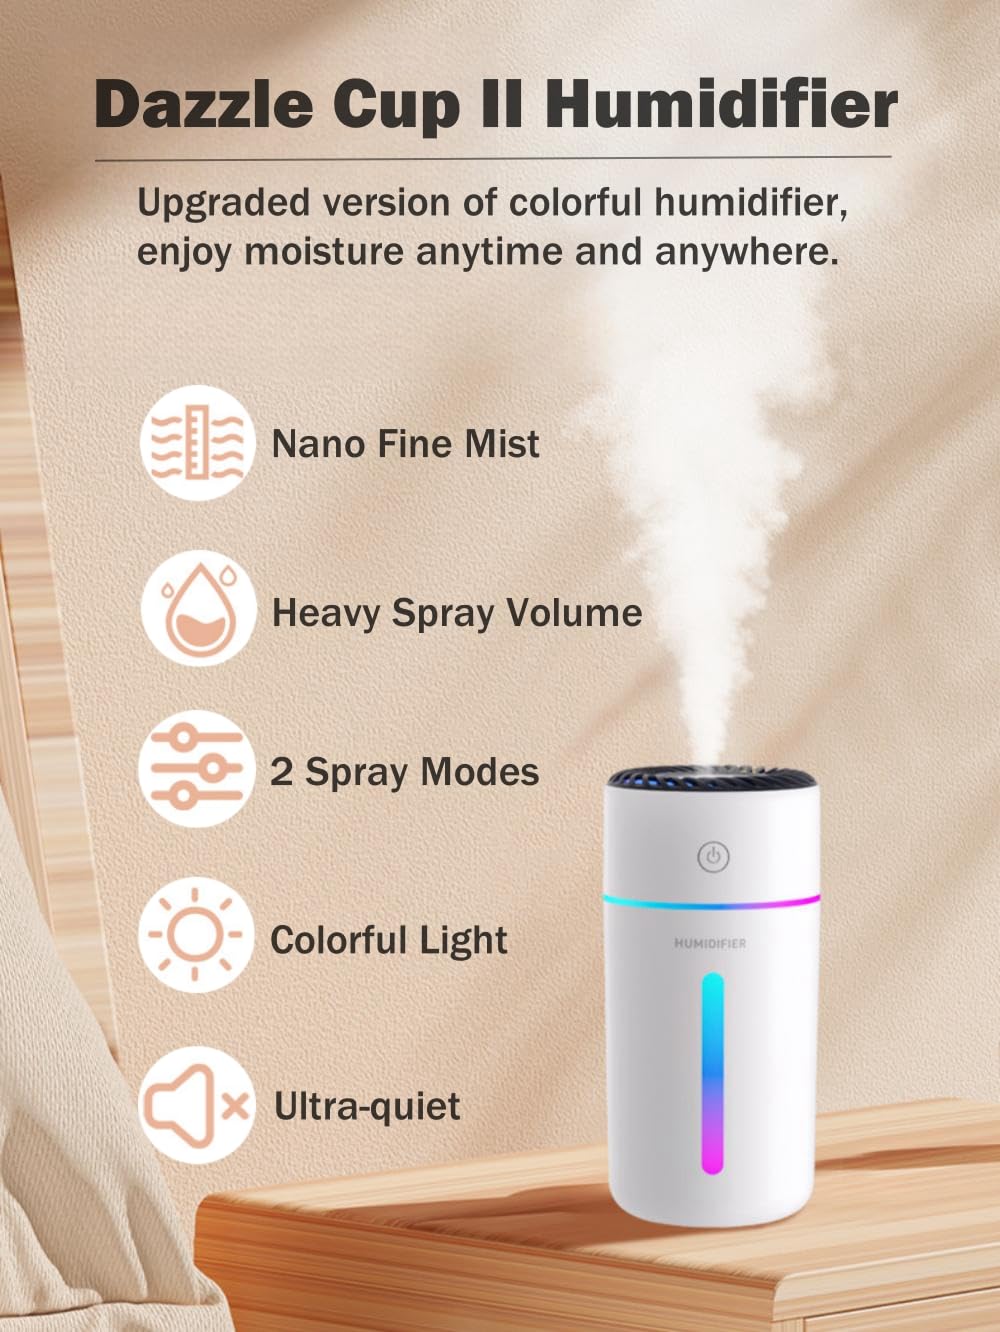 Mini Humidifier, 350ML Small Personal USB Cool Mist Humidifiers with Colorful Light, 2 Spray Modes, Auto Shut-Off, Ultra-Quiet Portable Air Humidifier for Car Home Bedroom Office Desktop (Black)